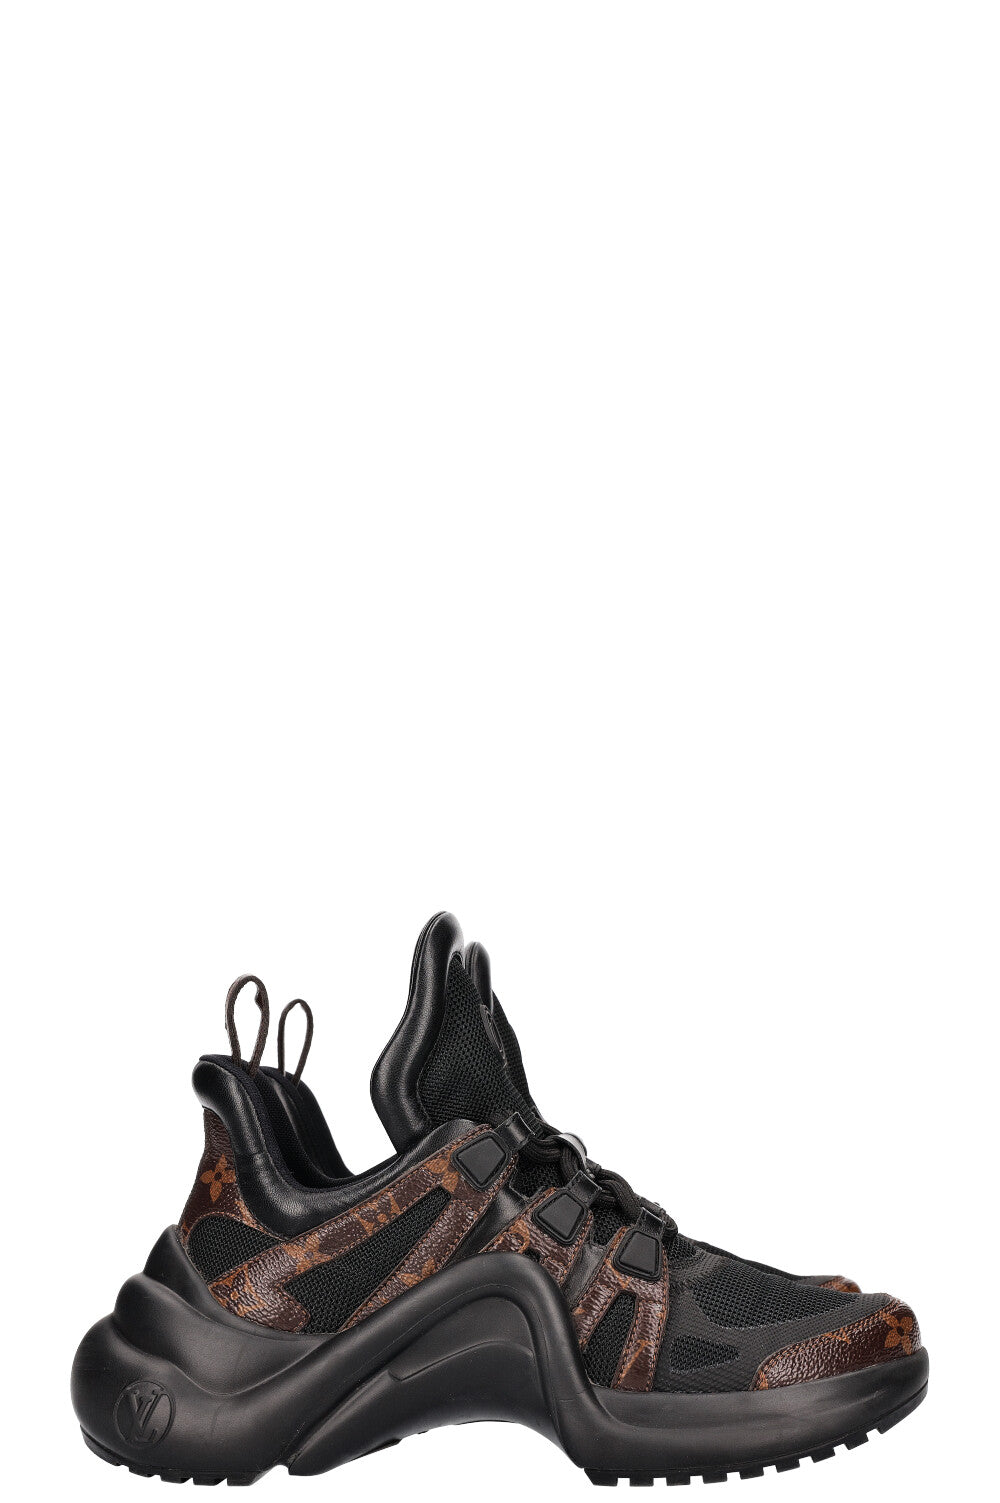 LOUIS VUITTON Archlight Sneakers MNG